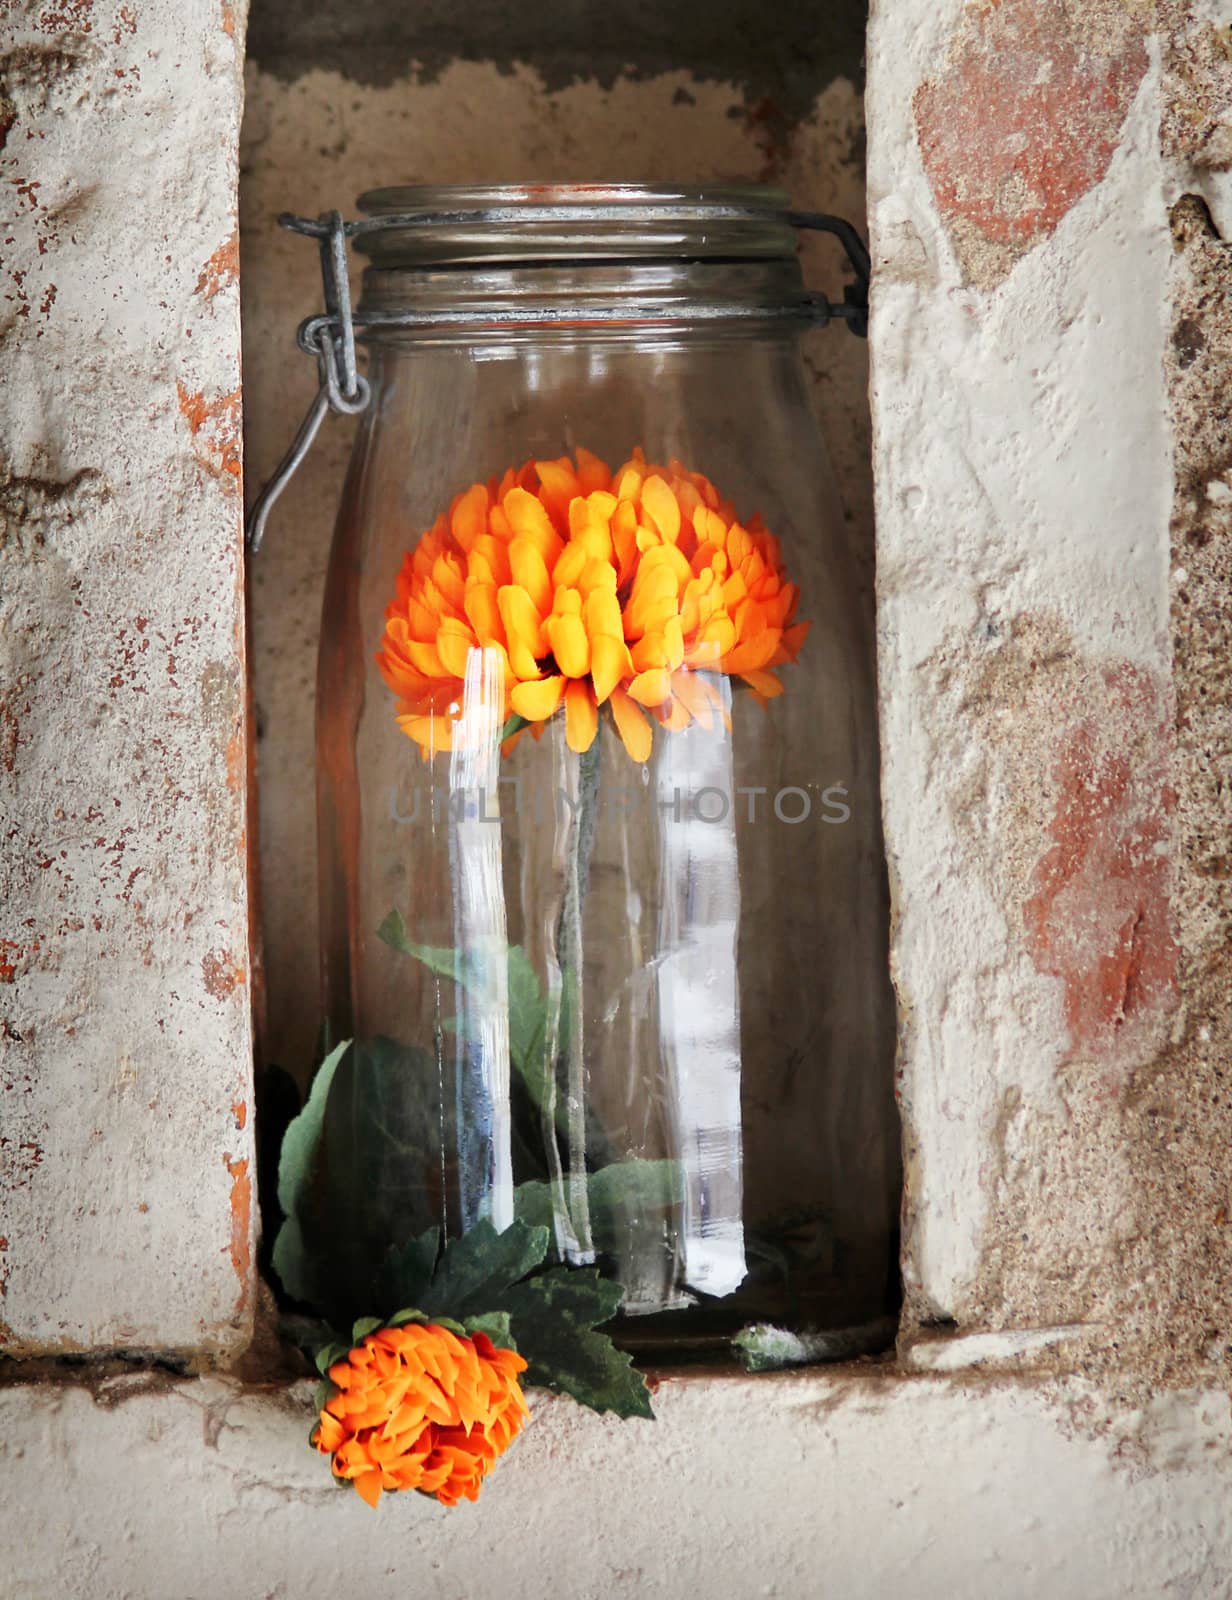 nice glass with an orange blossom standing in the tight niche